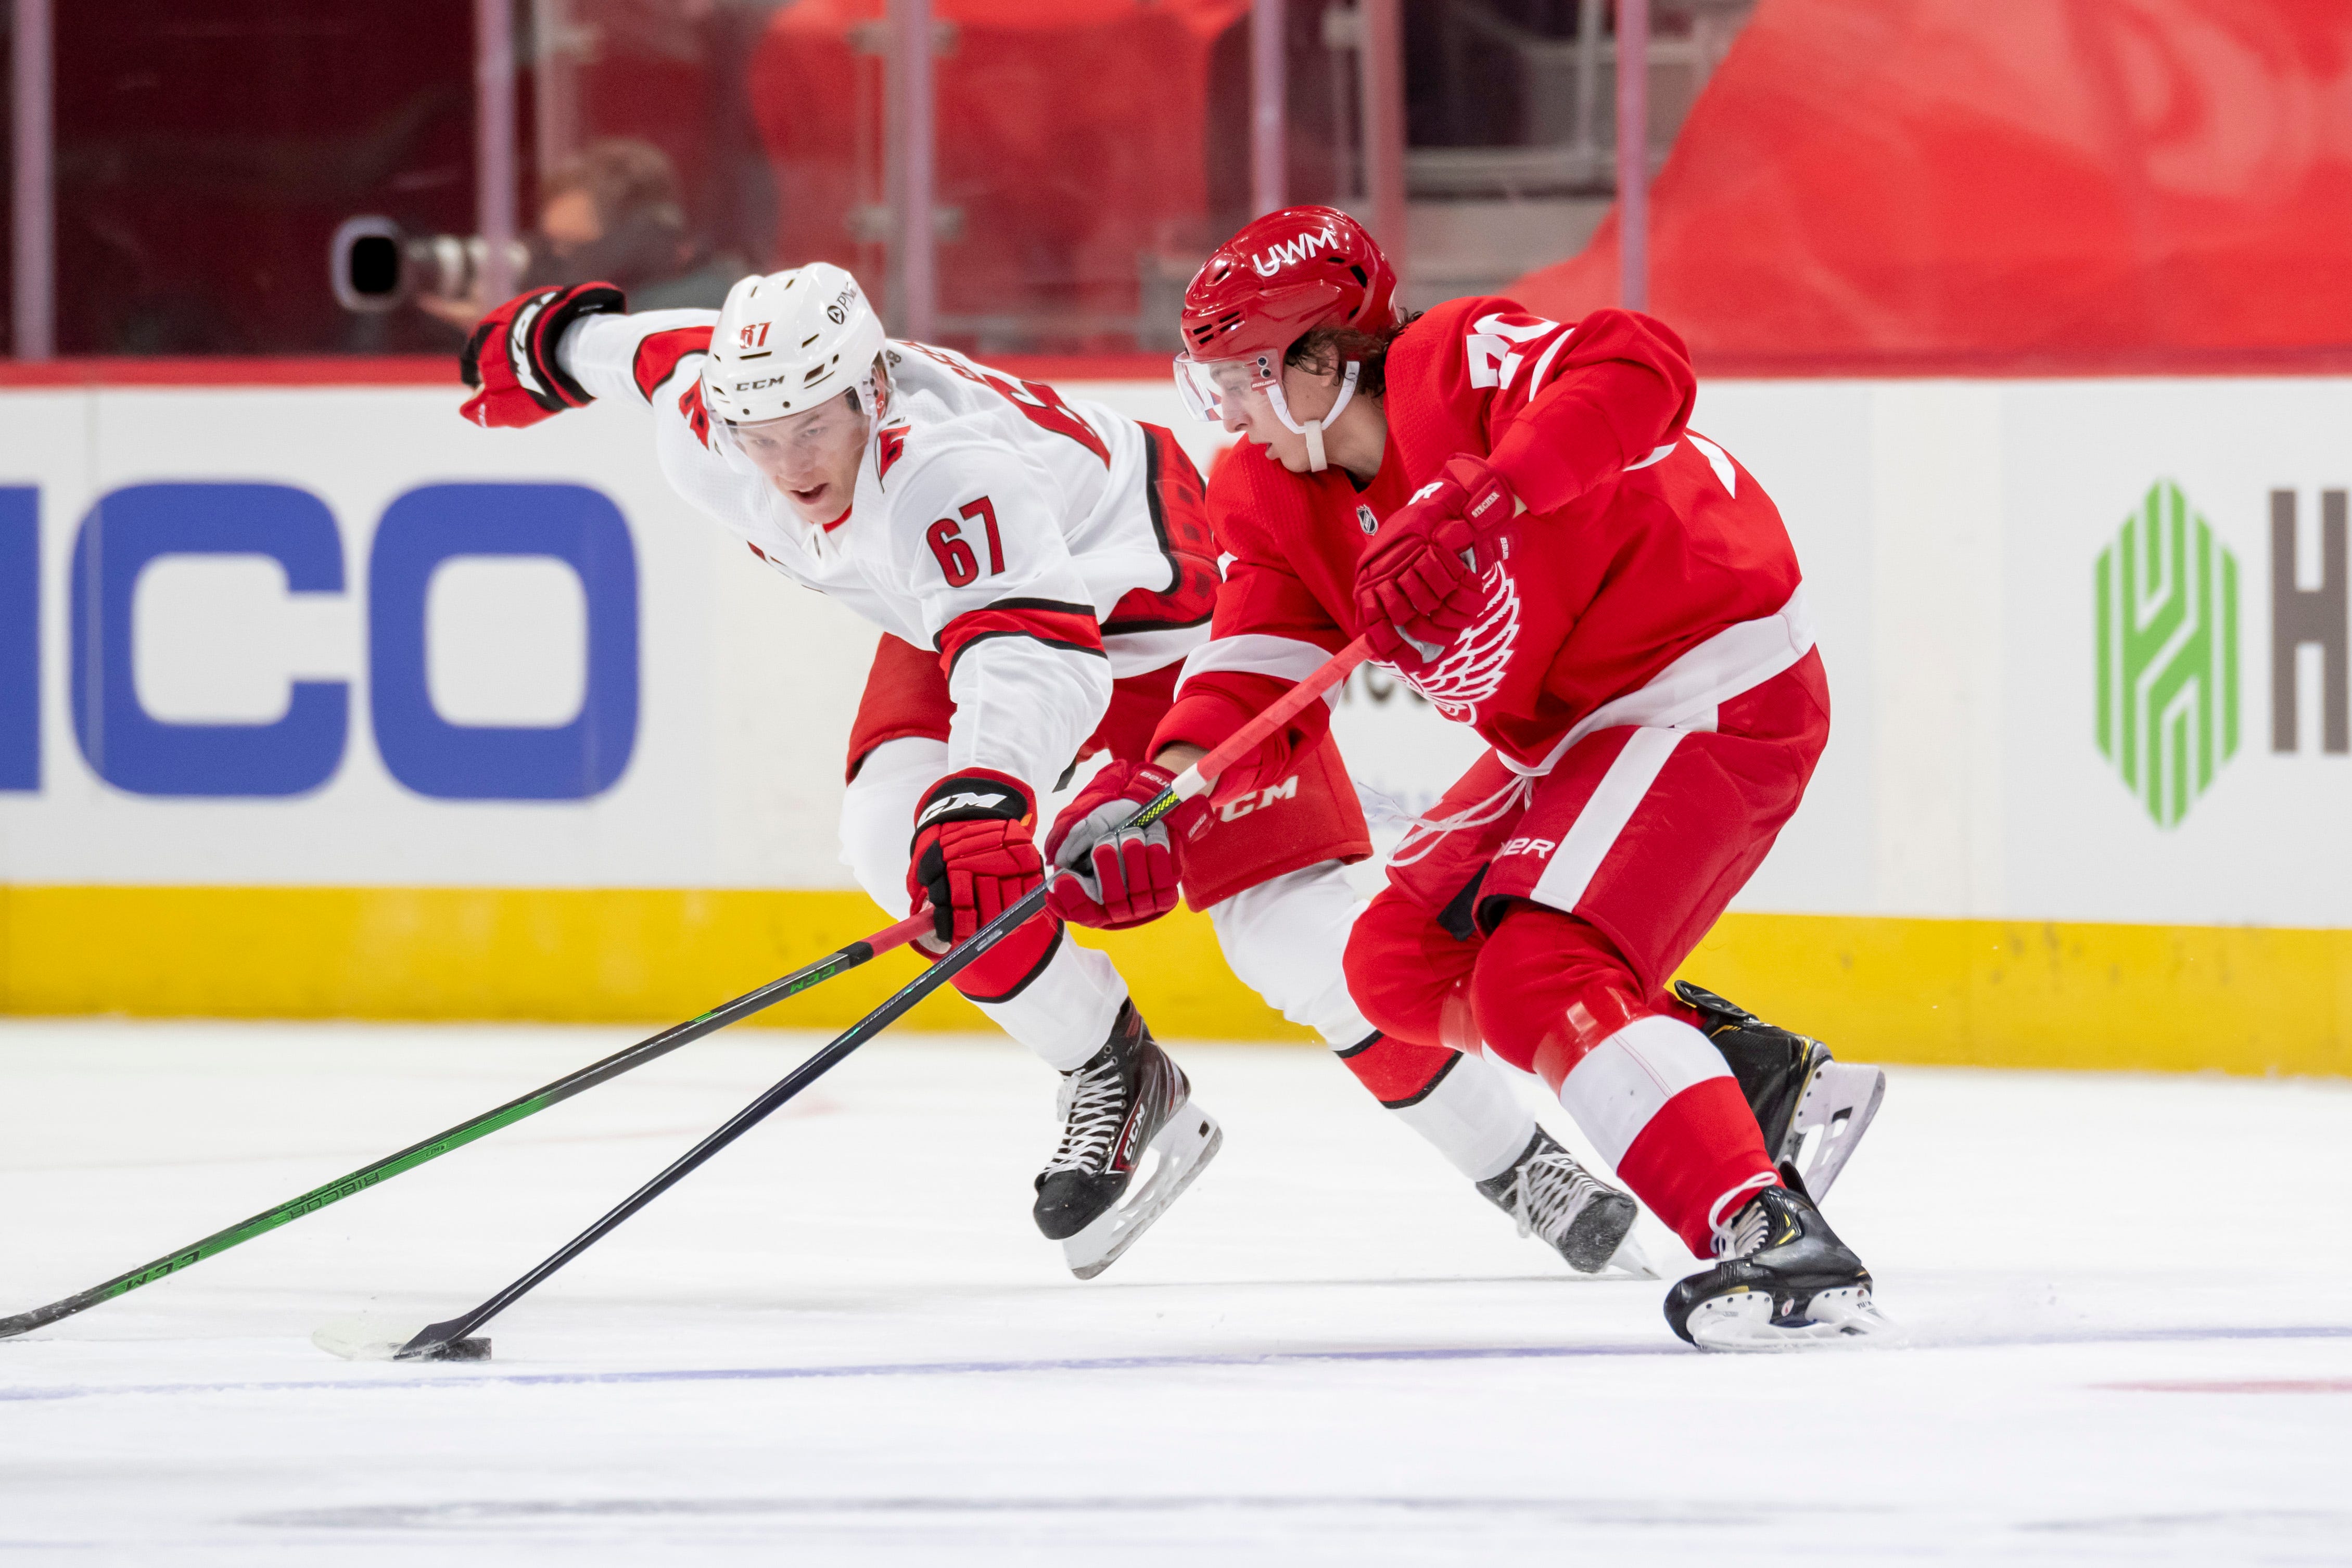 Detroit defenseman Troy Stecher keeps the puck away from Carolina center Morgan Geekie in the second period.